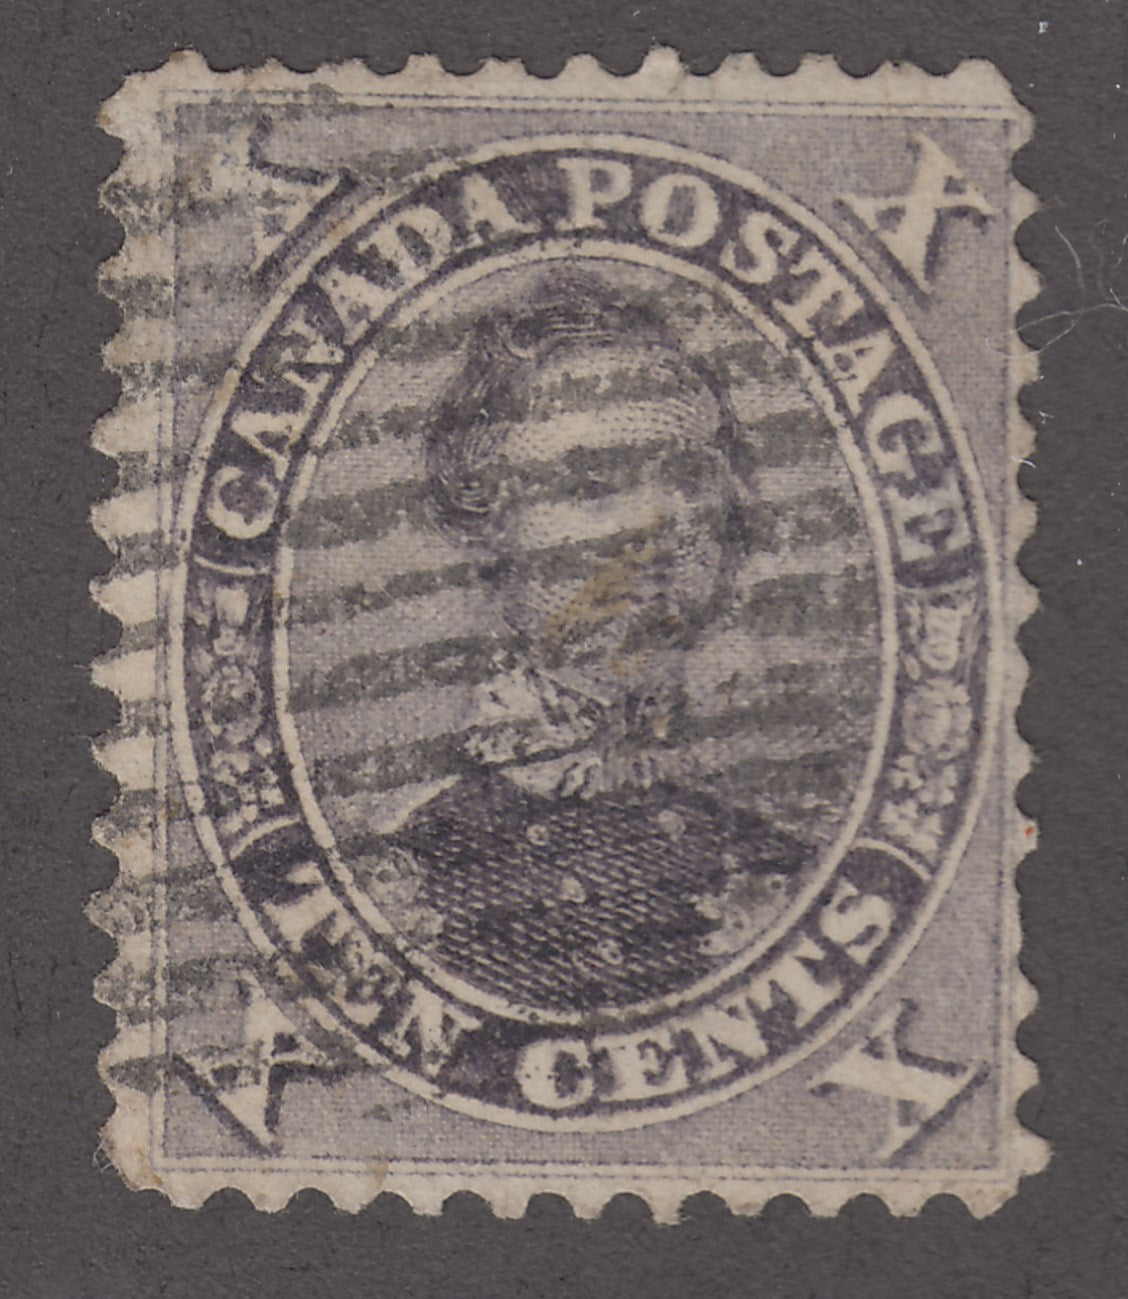 0017CA1802 - Canada #17 - Used Double Print